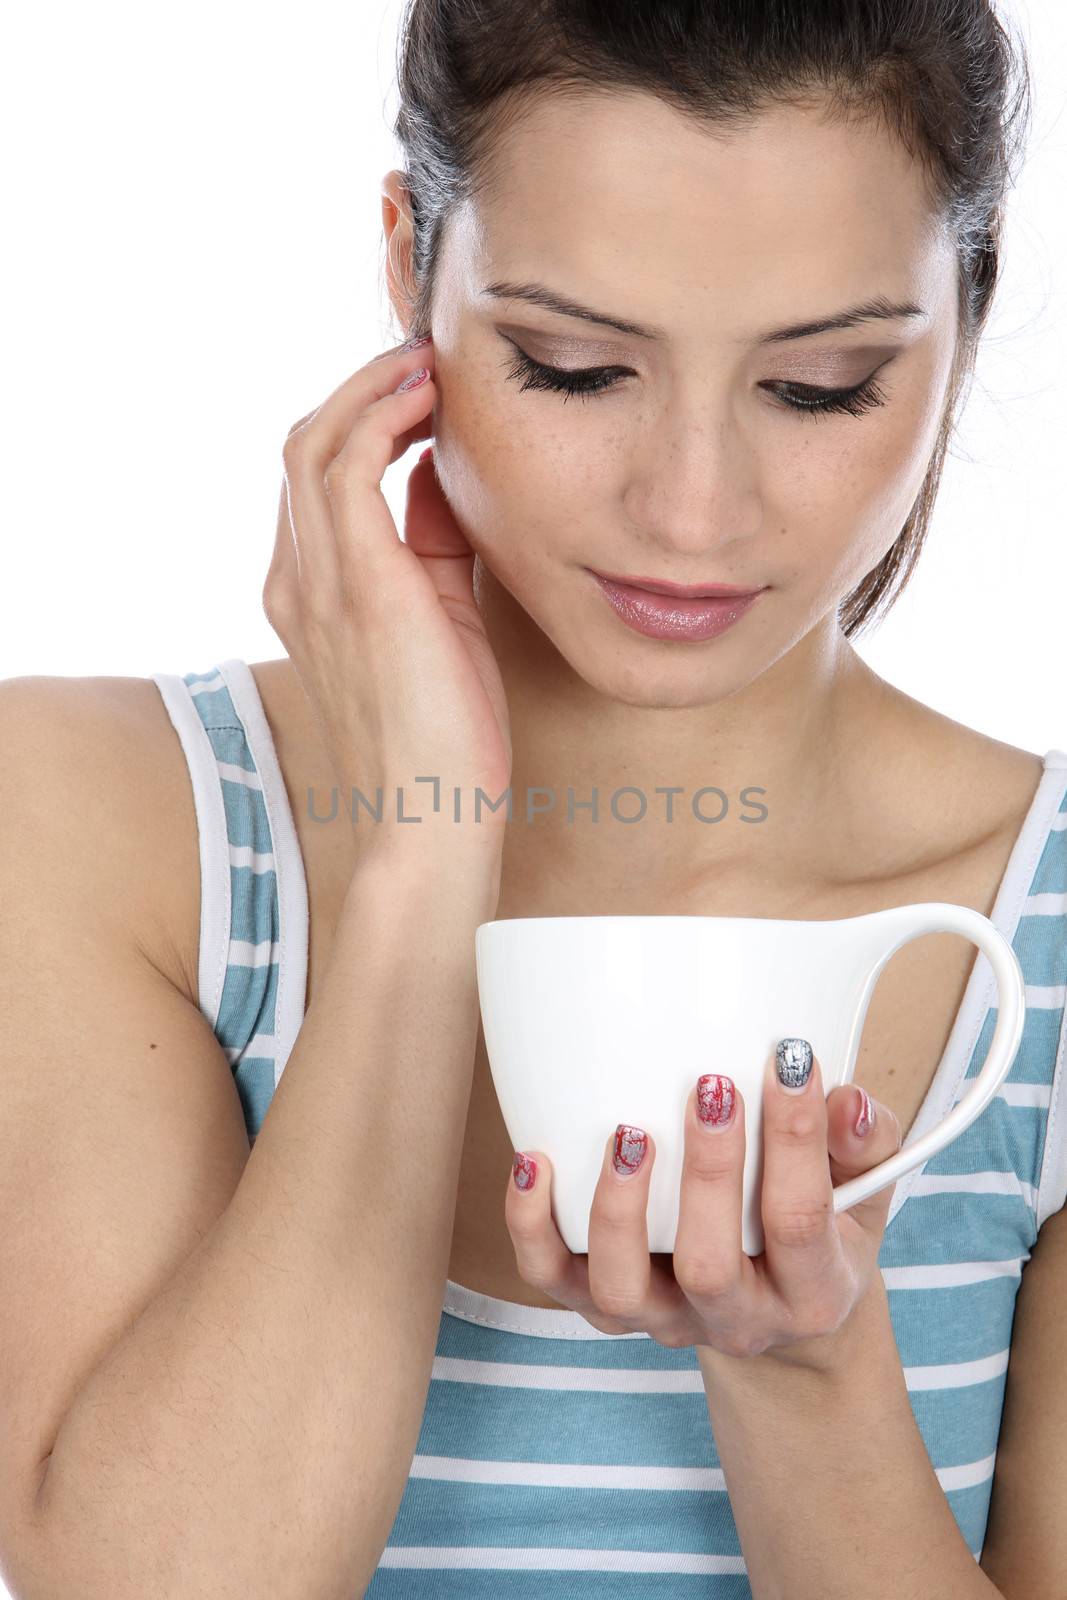 Model Released. Woman Drinking a Cup of Tea